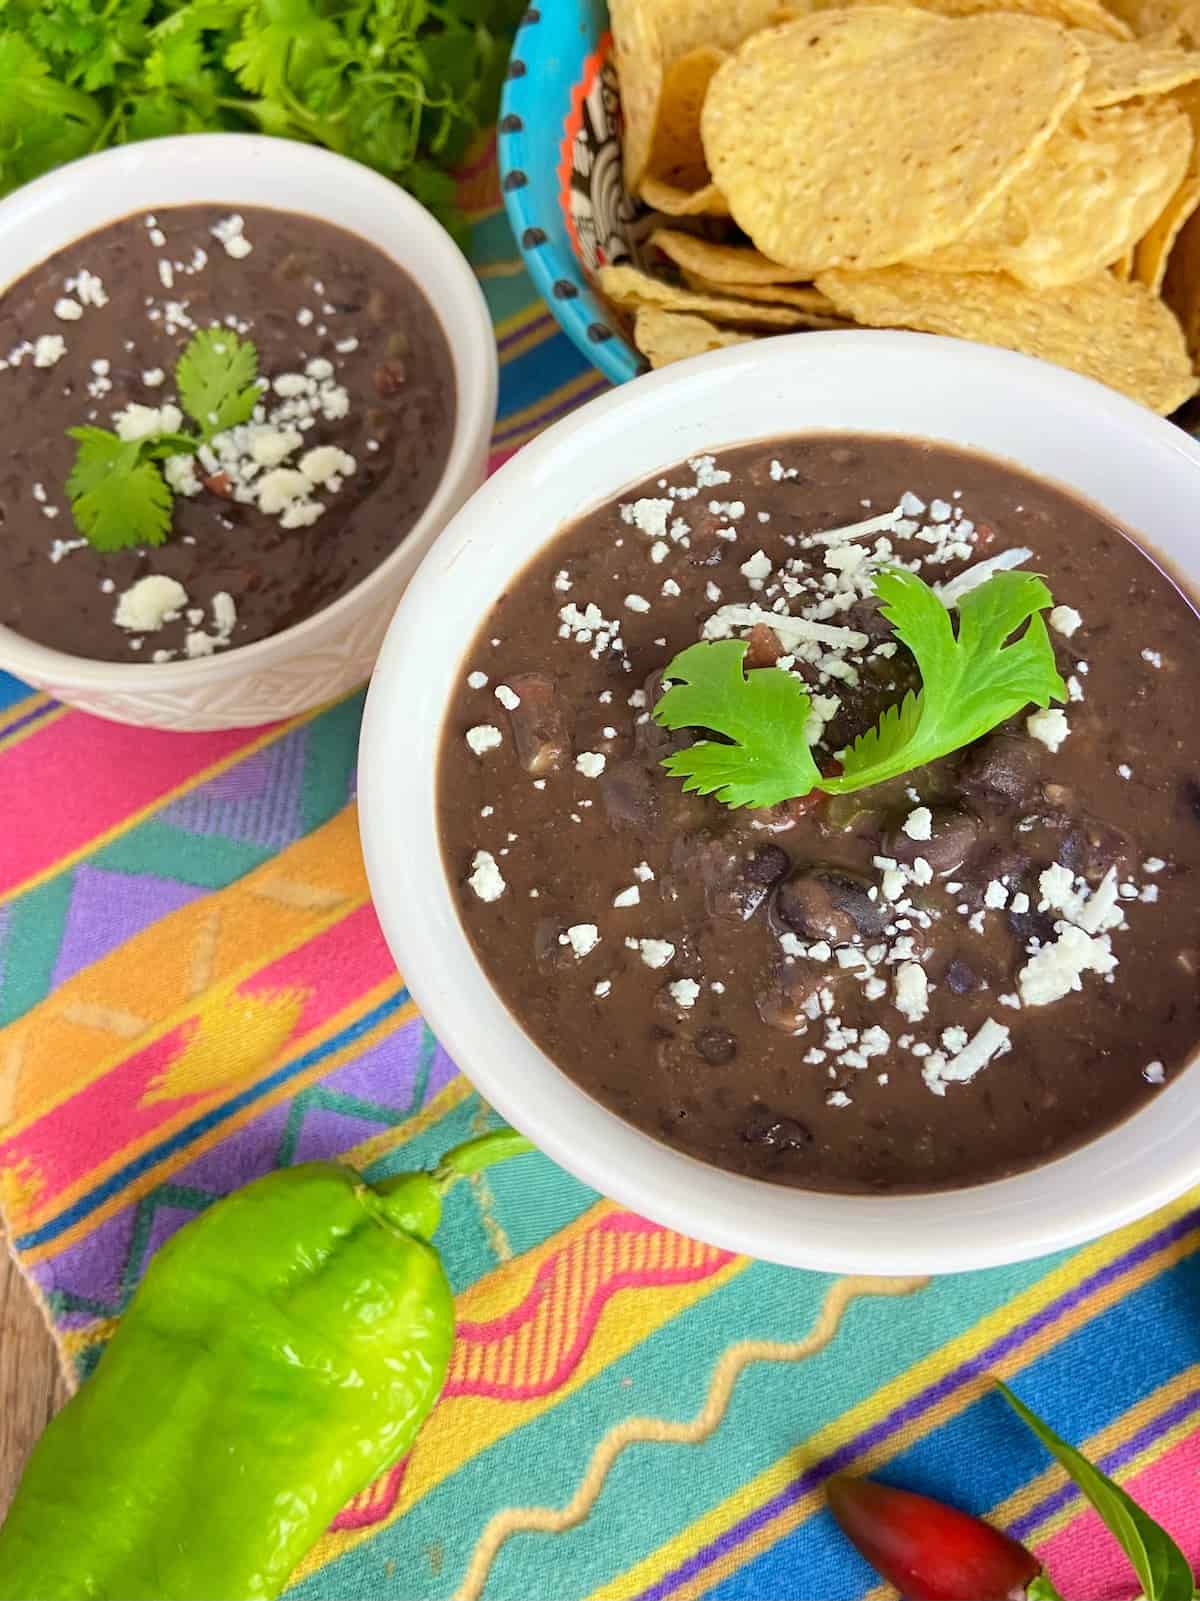 Two bowls of black bean soup with a side of tortilla chips on a colorful tablecloth.